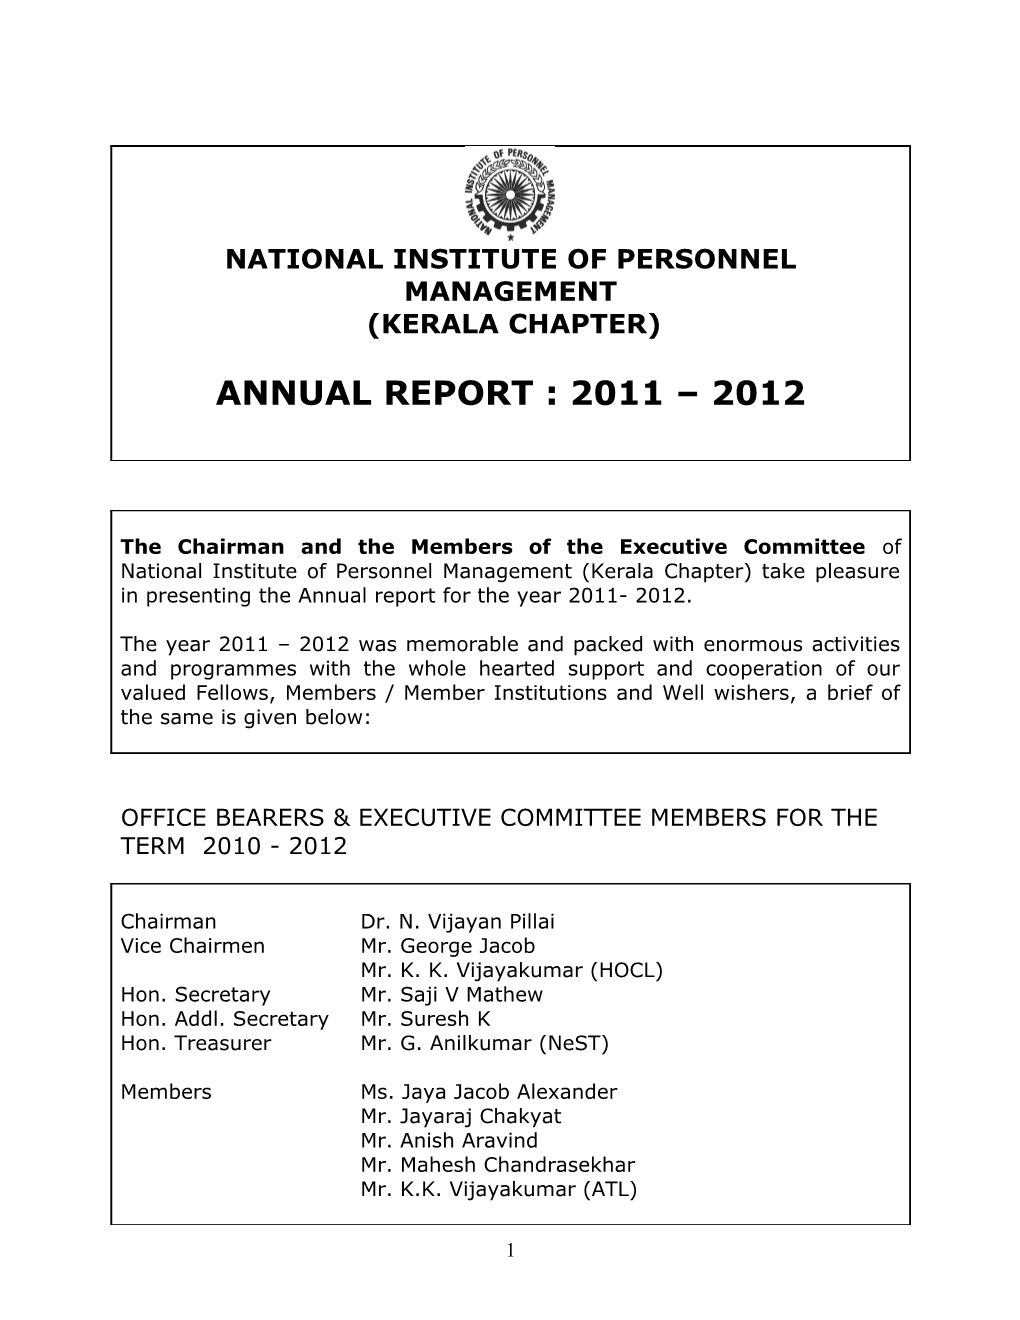 OFFICE BEARERS & EXECUTIVE COMMITTEE MEMBERS for the Term 2010 - 2012